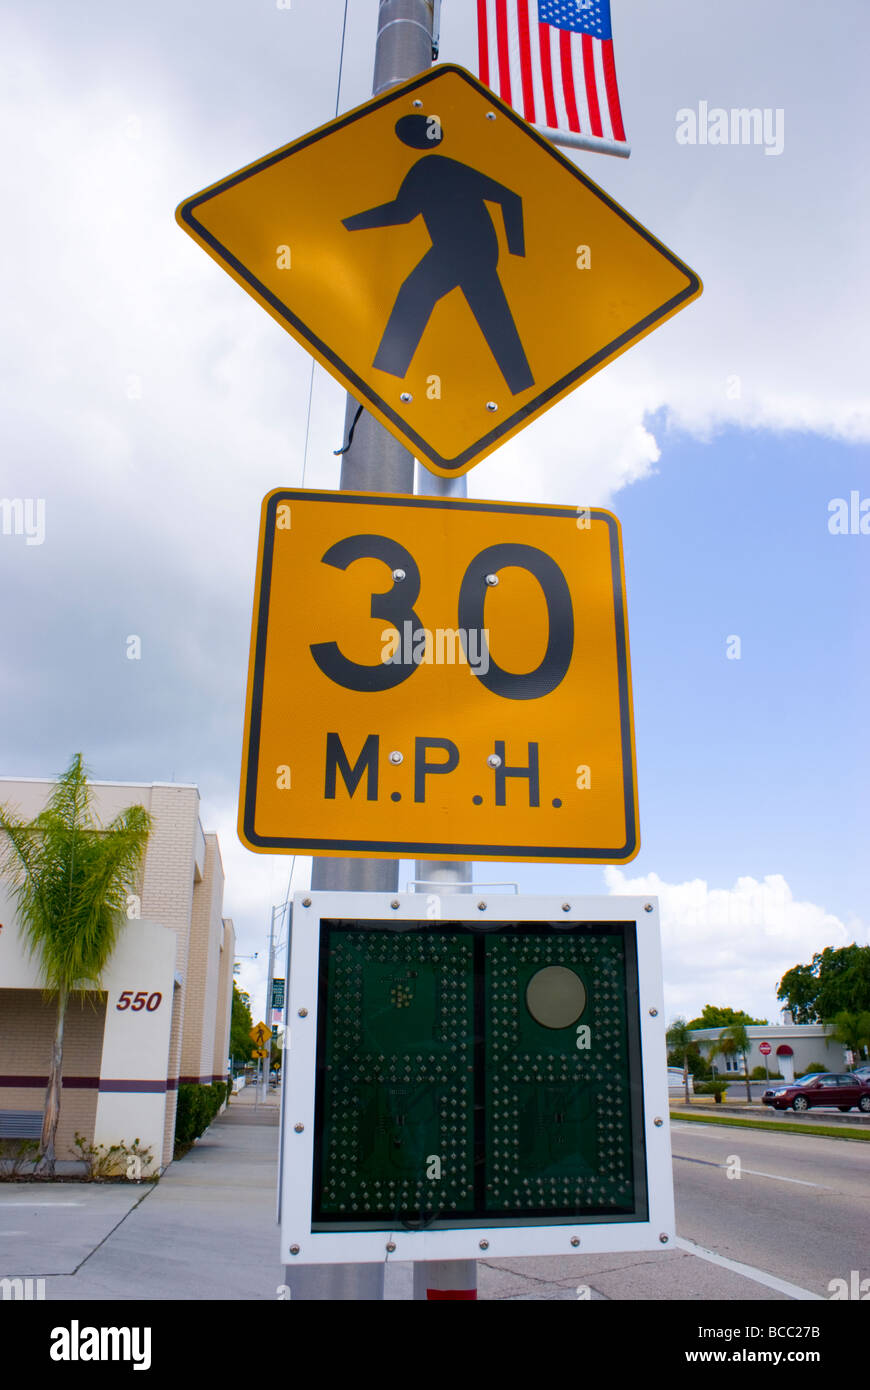 American 30 mph speed limit road sign in Titusville, Florida Stock Photo